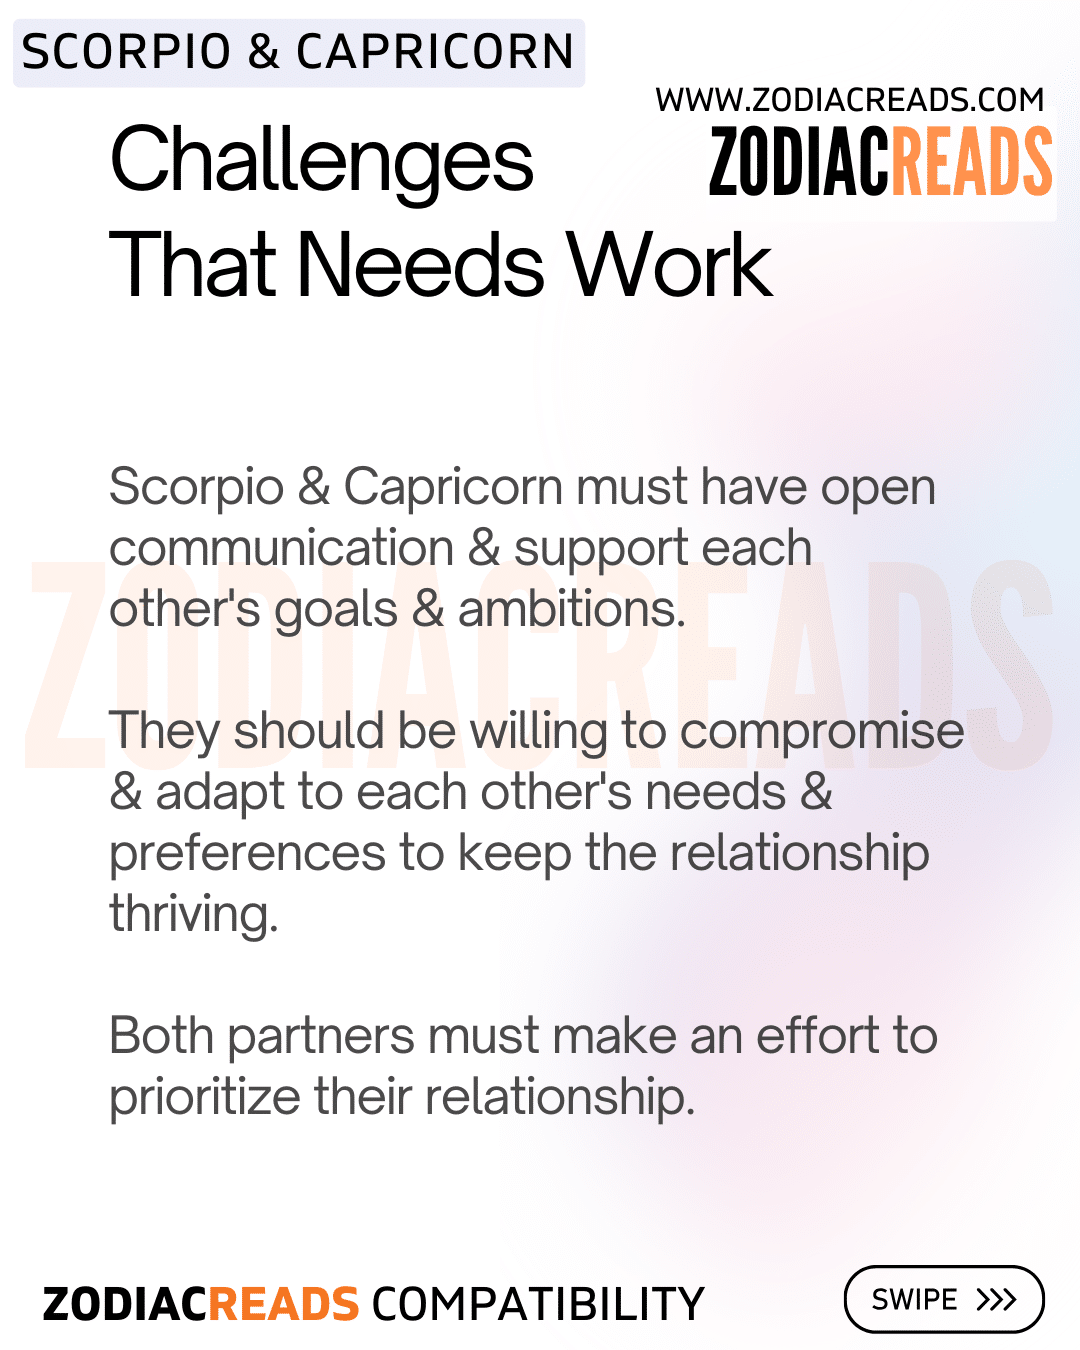 Challenges that Scorpio and Capricorn need to work on